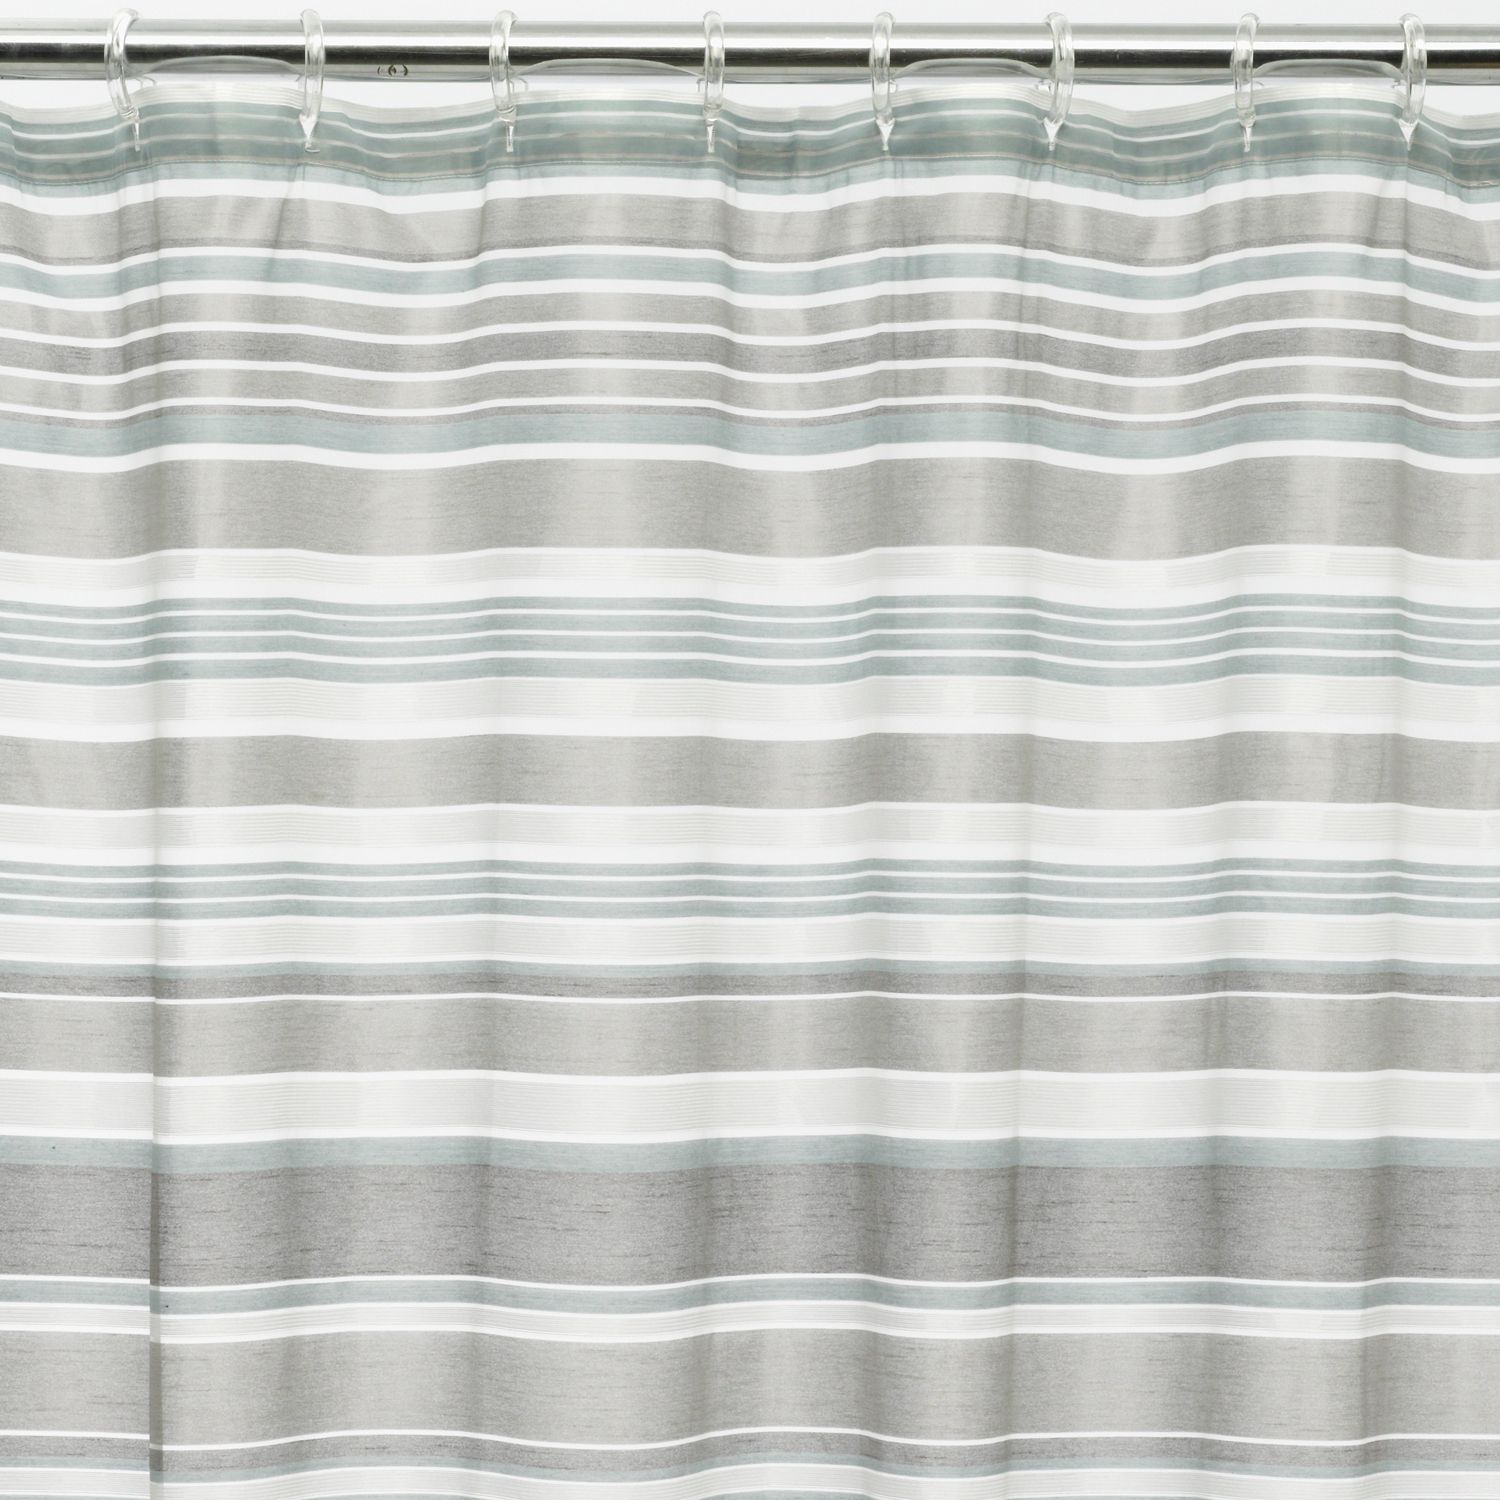 Image for Home Classics Glacier Fabric Shower Curtain at Kohl's.